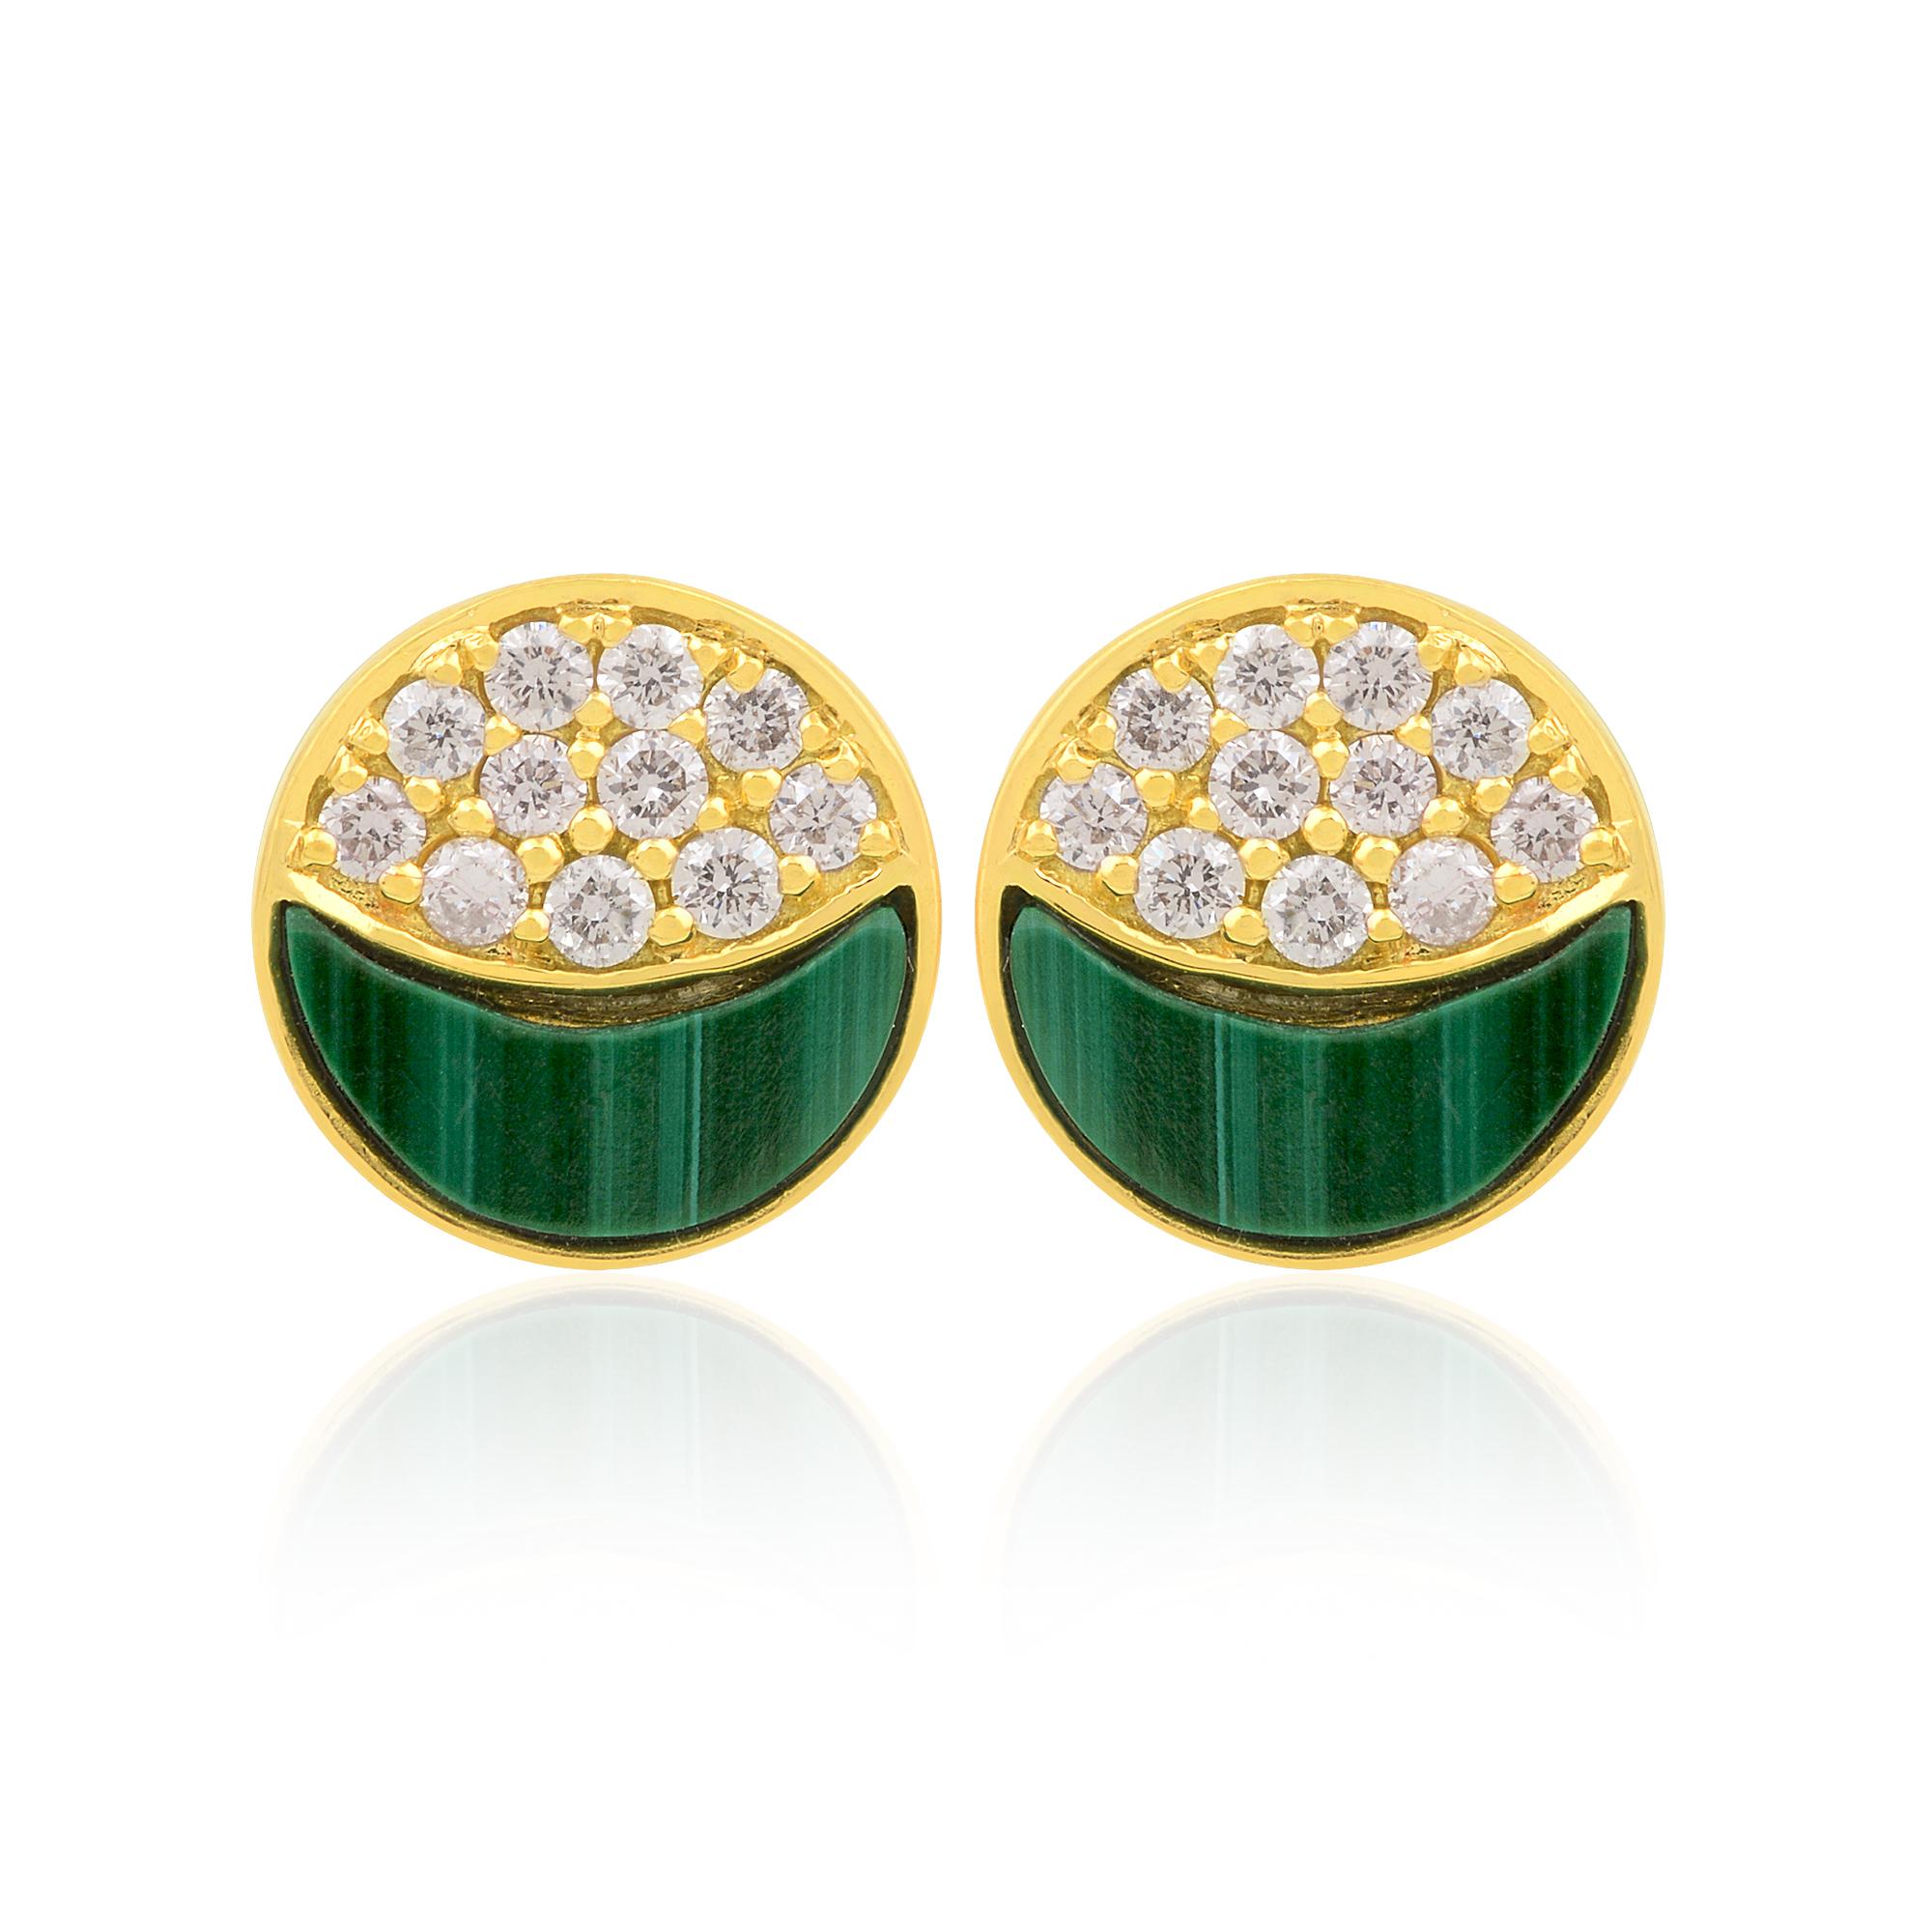 Item Code :- CN-16770
Gross Wt. :- 2.95 gm
18k Solid Yellow Gold Wt. :- 2.63 gm
Natural Diamond Wt. :- 0.32 Ct.  ( AVERAGE DIAMOND CLARITY SI1-SI2 & COLOUR H-I )
Malachite Wt. :- 1.27 Ct. 
Earrings Size :- 10 mm approx.

✦